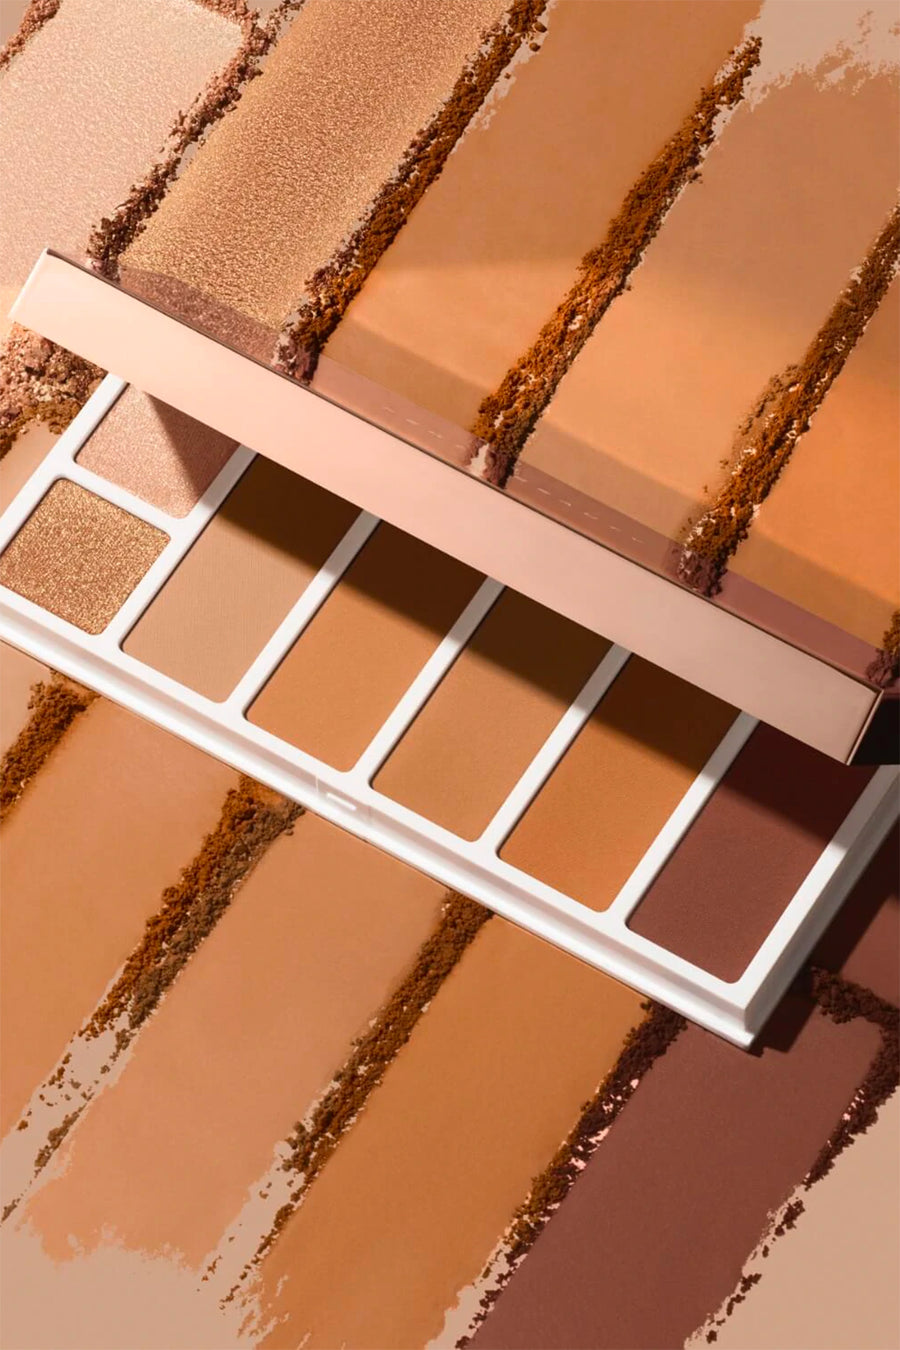 Fenty Beauty Sun Stalk"R Bronzer And Highlighter Palette Brings All Skin Tones To Life..